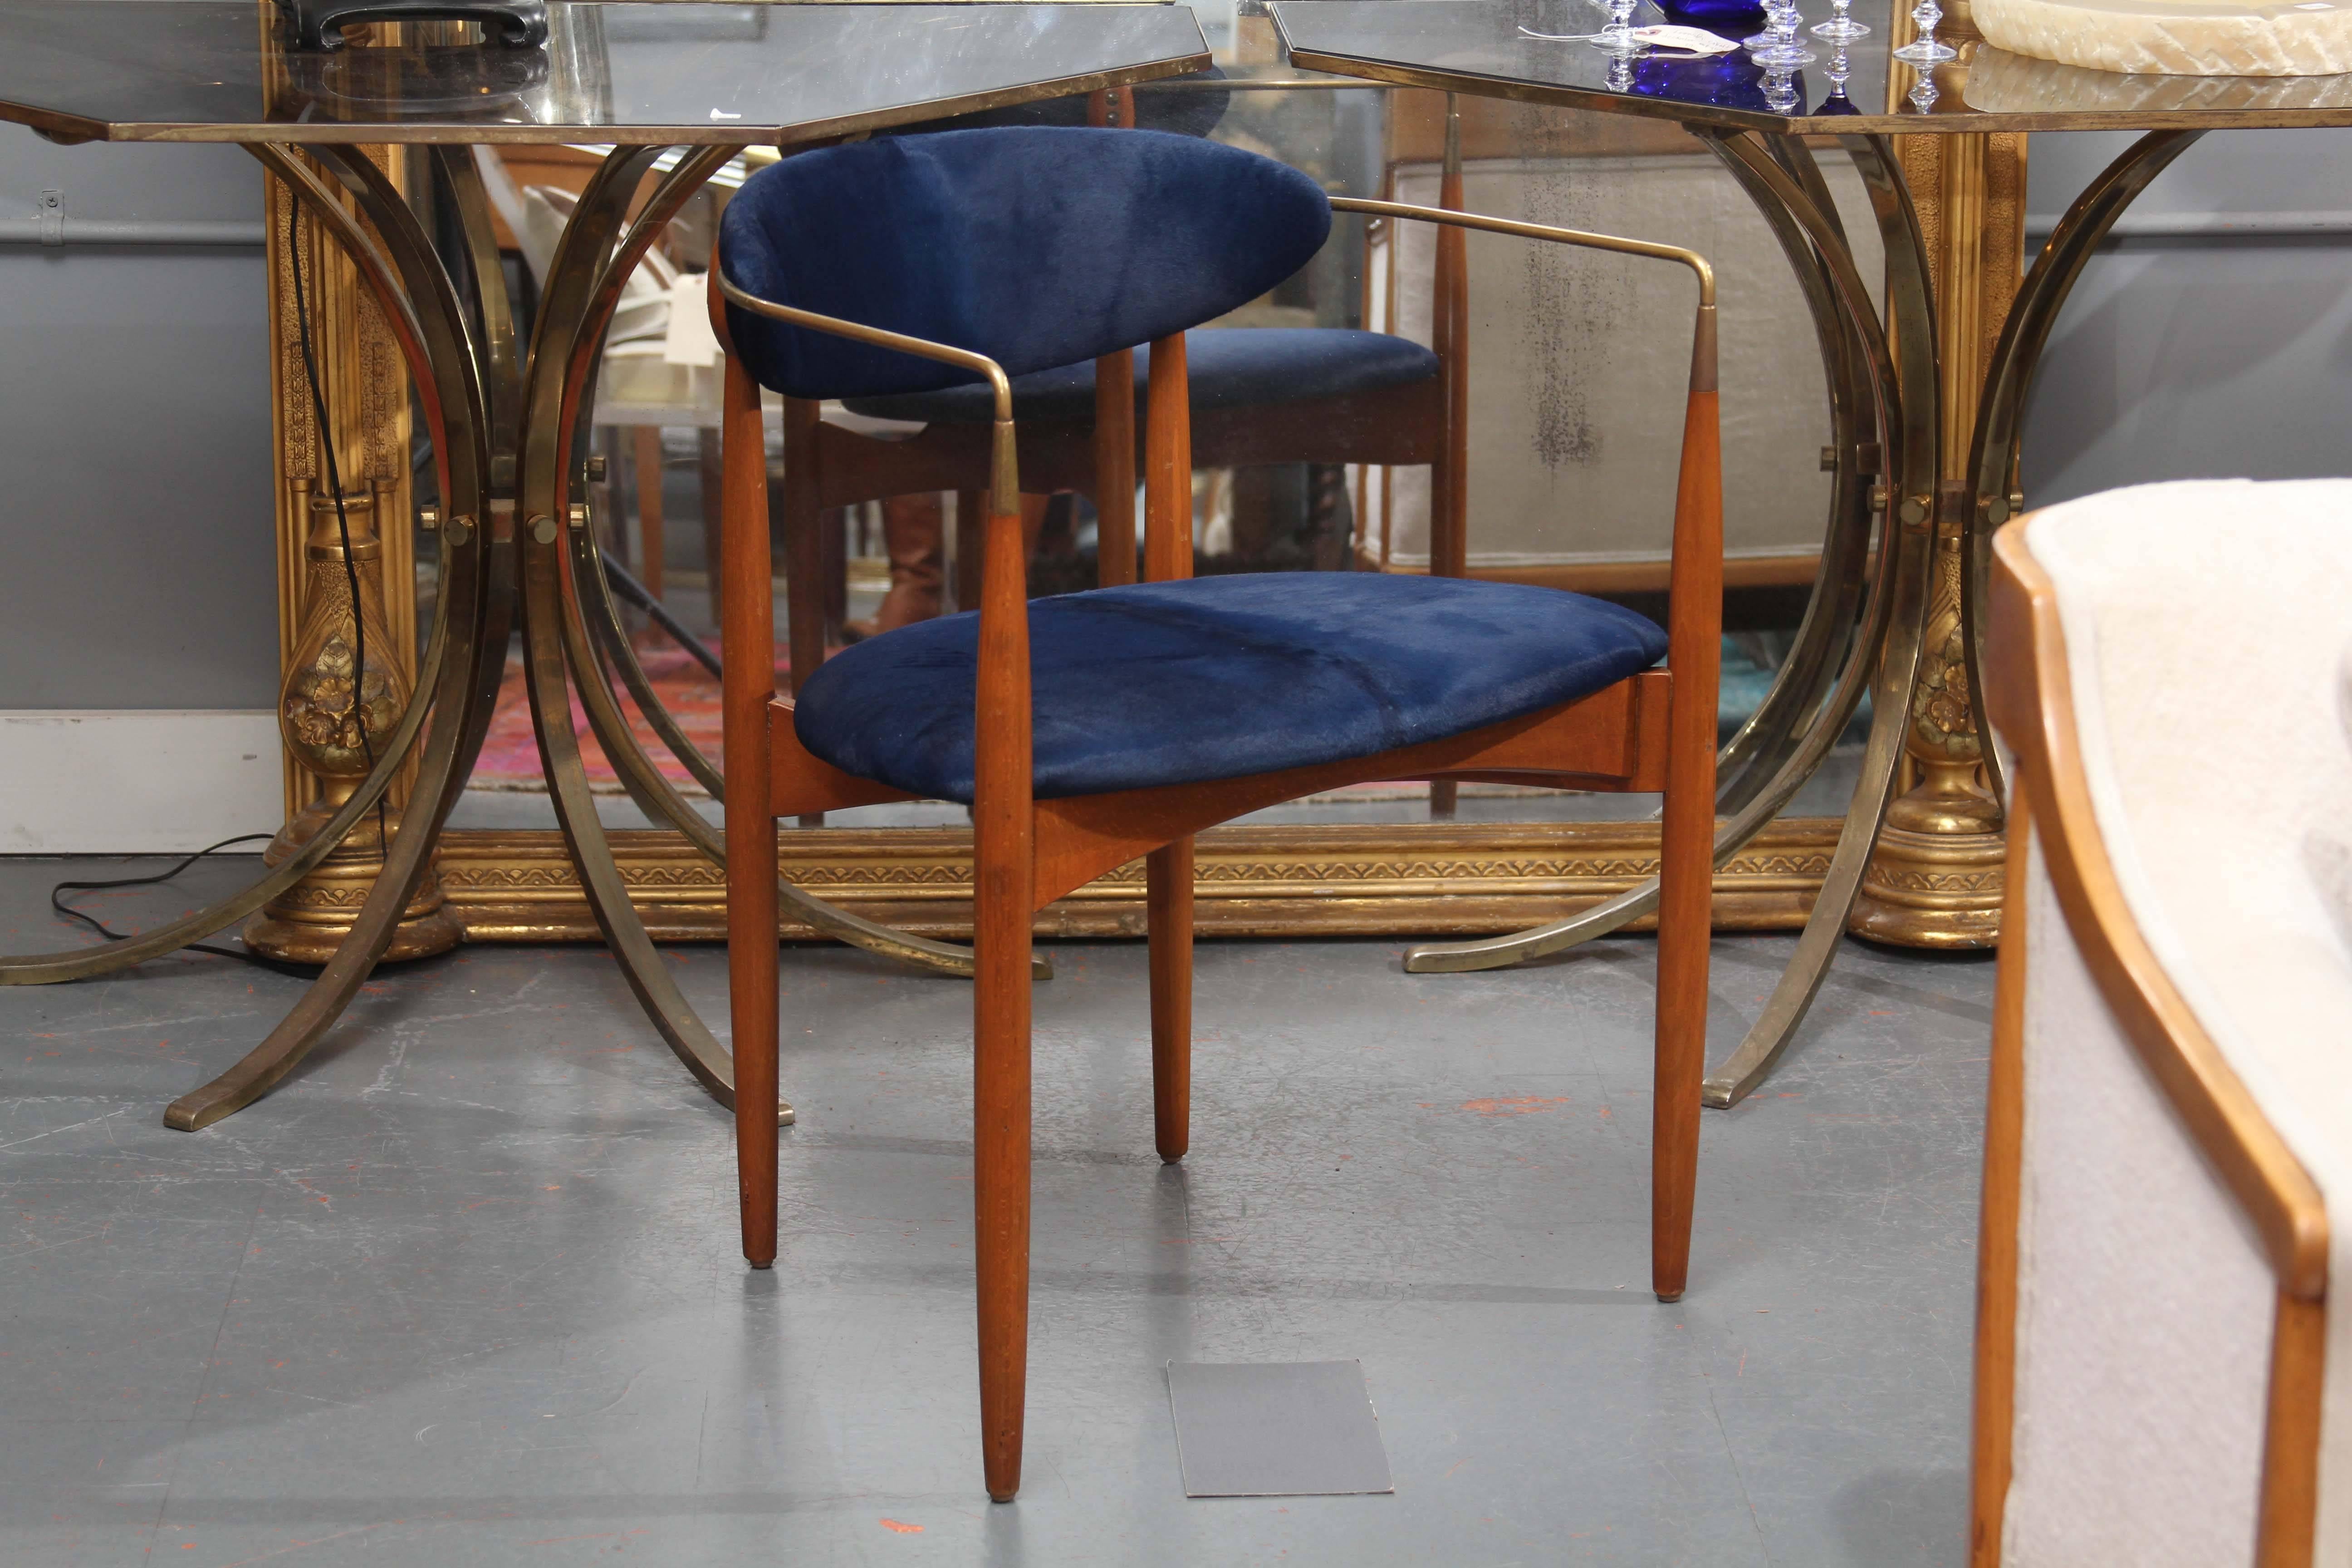 Great lines on this side chair. Glossy deep blue hide upholstery.